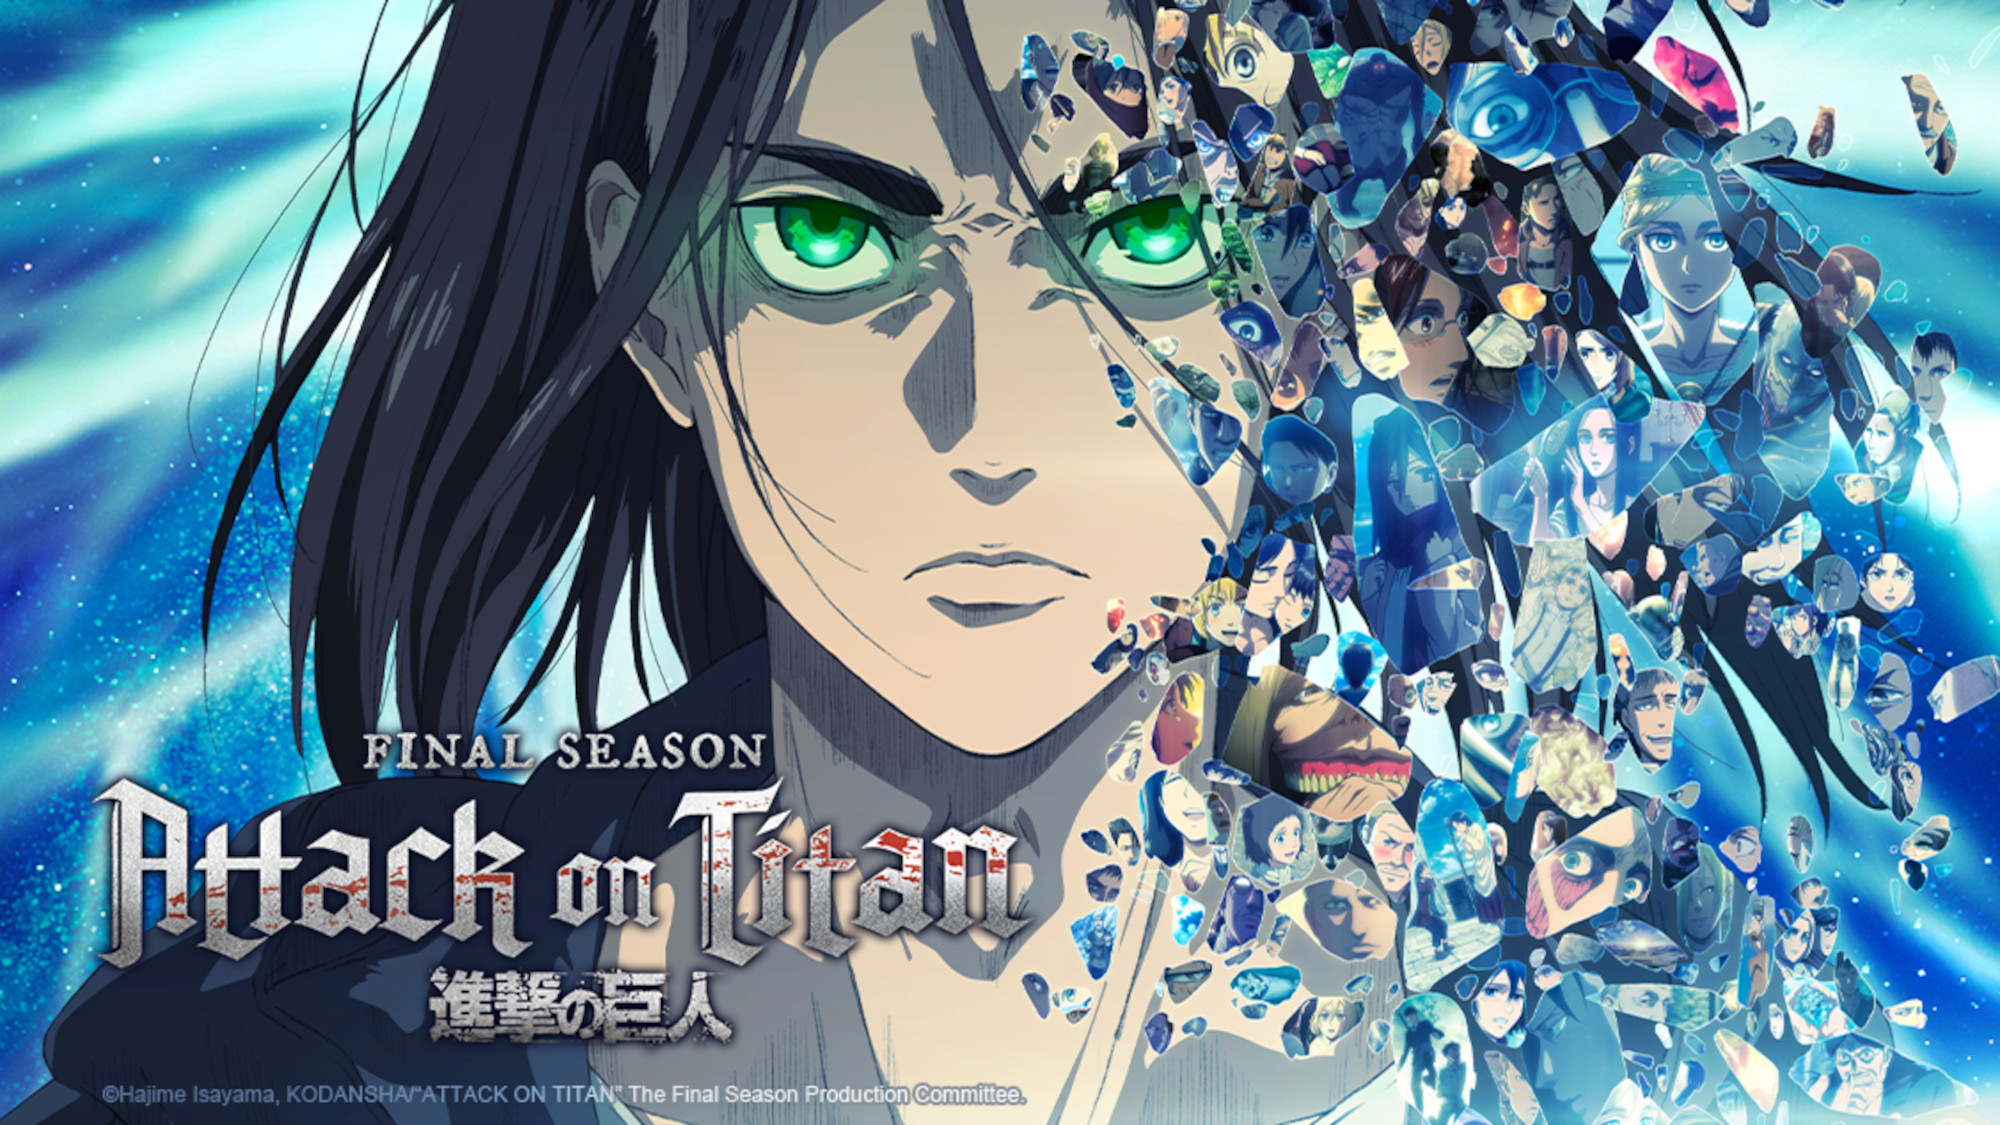 'Attack on Titan' Season 4 Part 2 key art featuring Eren Jaeger. Images from previous parts of the anime make up his left side.